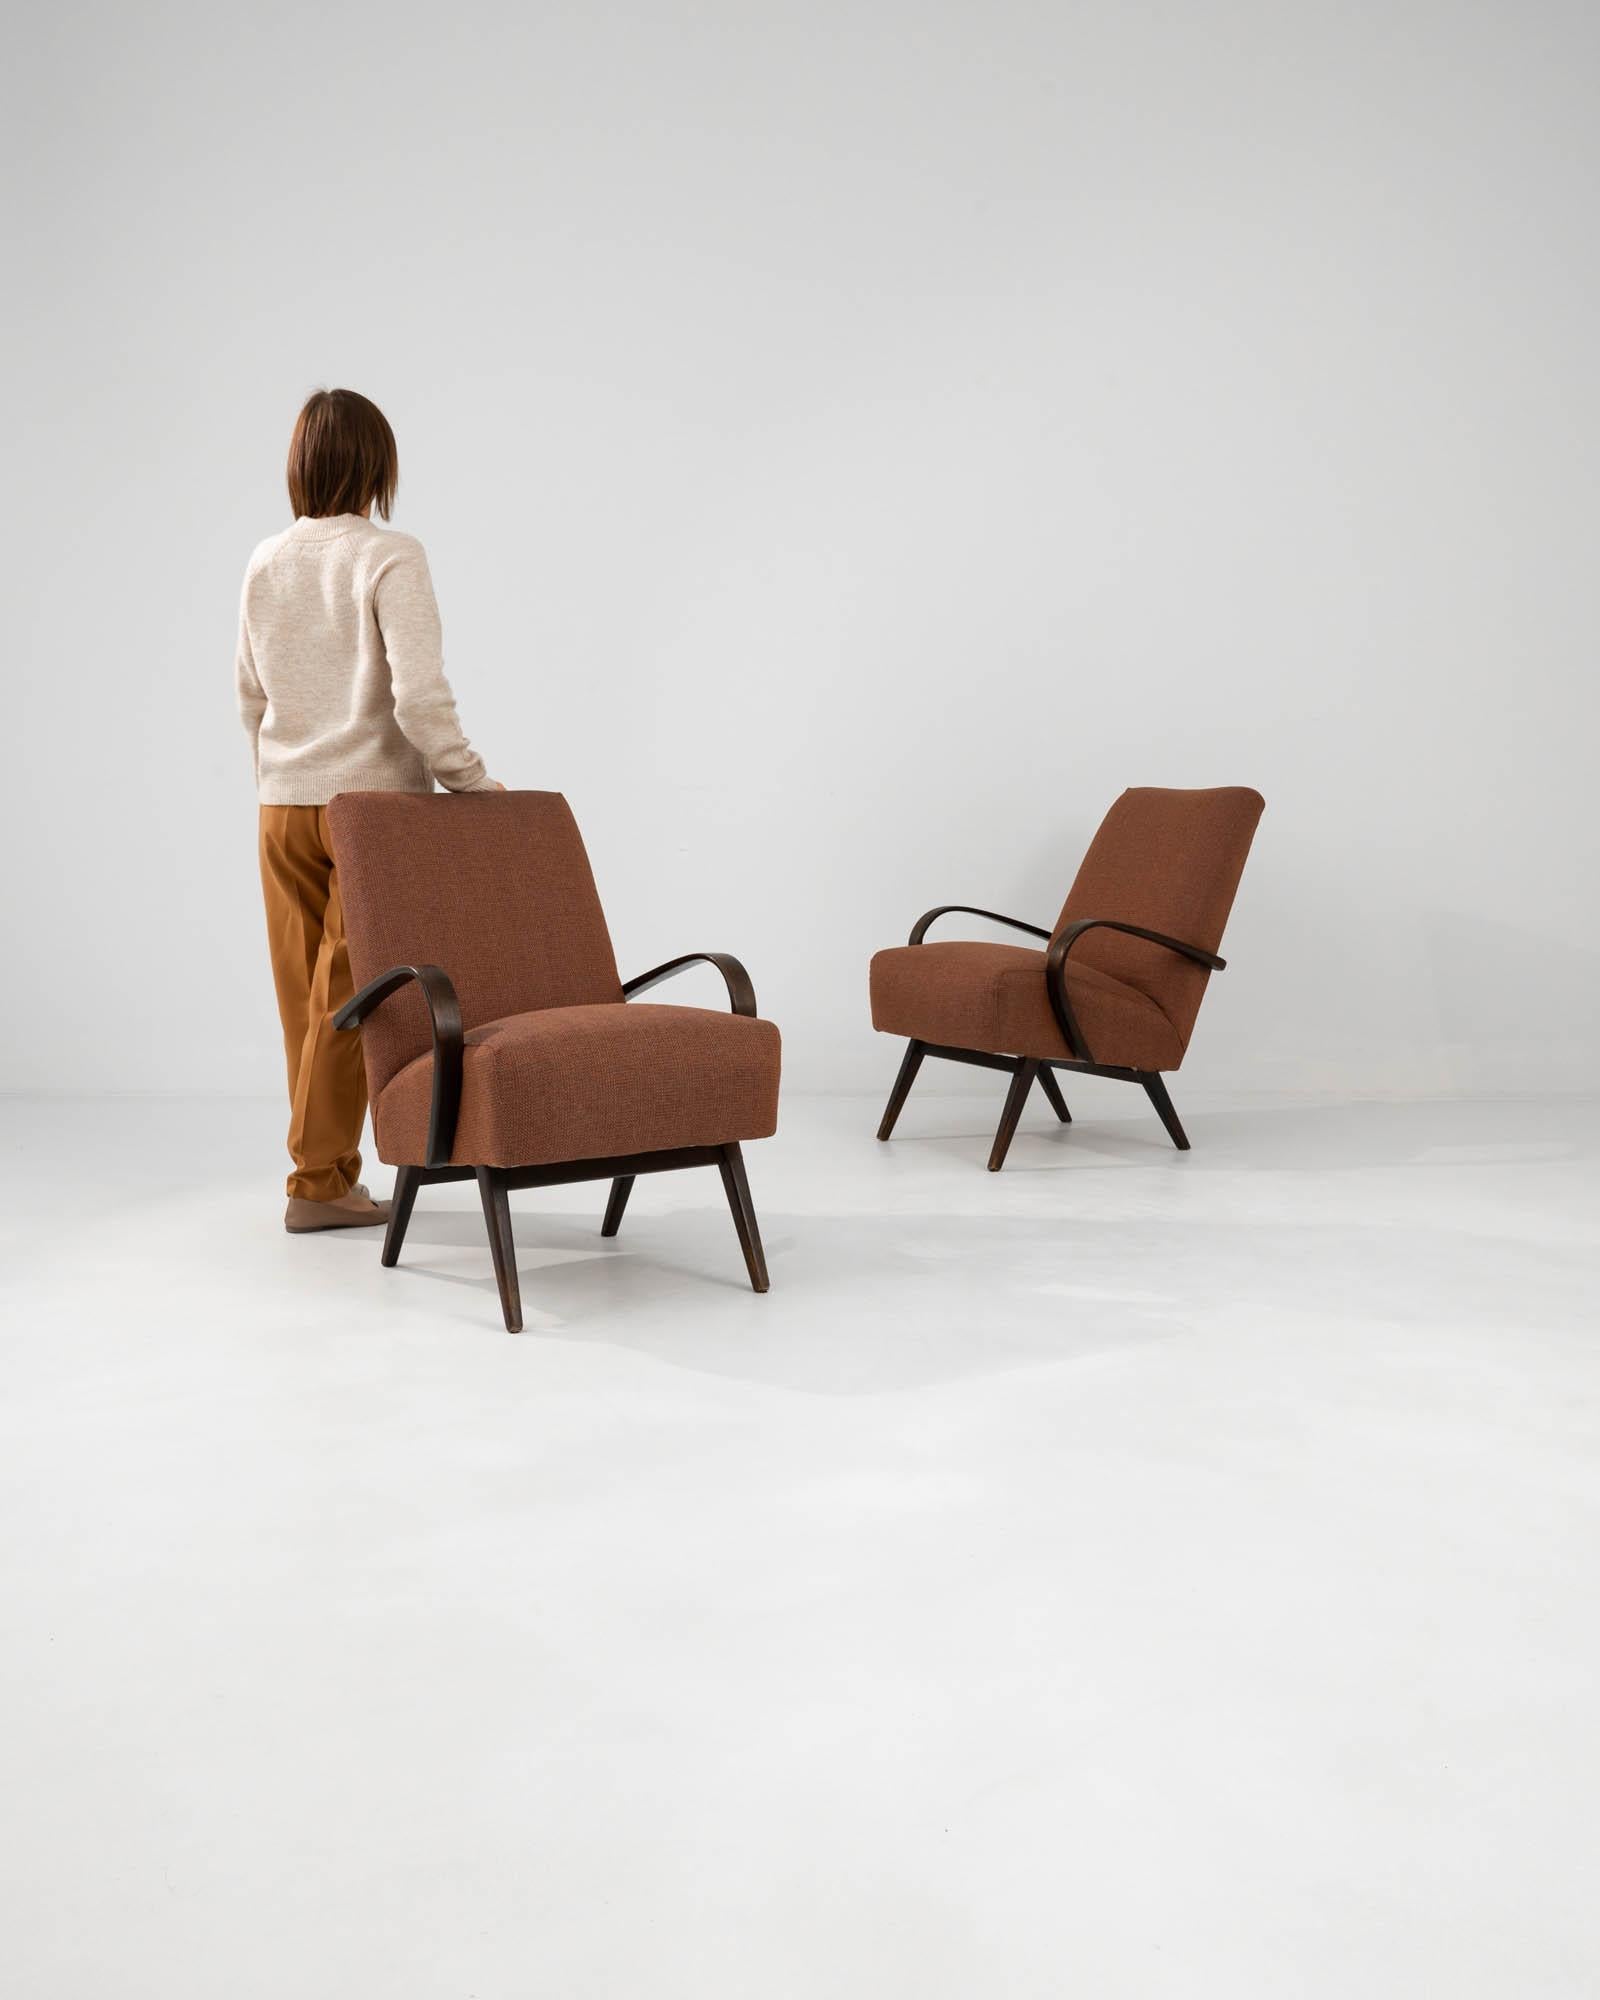 Infuse your living space with the timeless elegance and distinct design of these 1960s Czech upholstered armchairs by J. Halabala. Each chair exudes a warm, inviting aura with its rich terracotta-colored fabric, perfectly complementing the dark